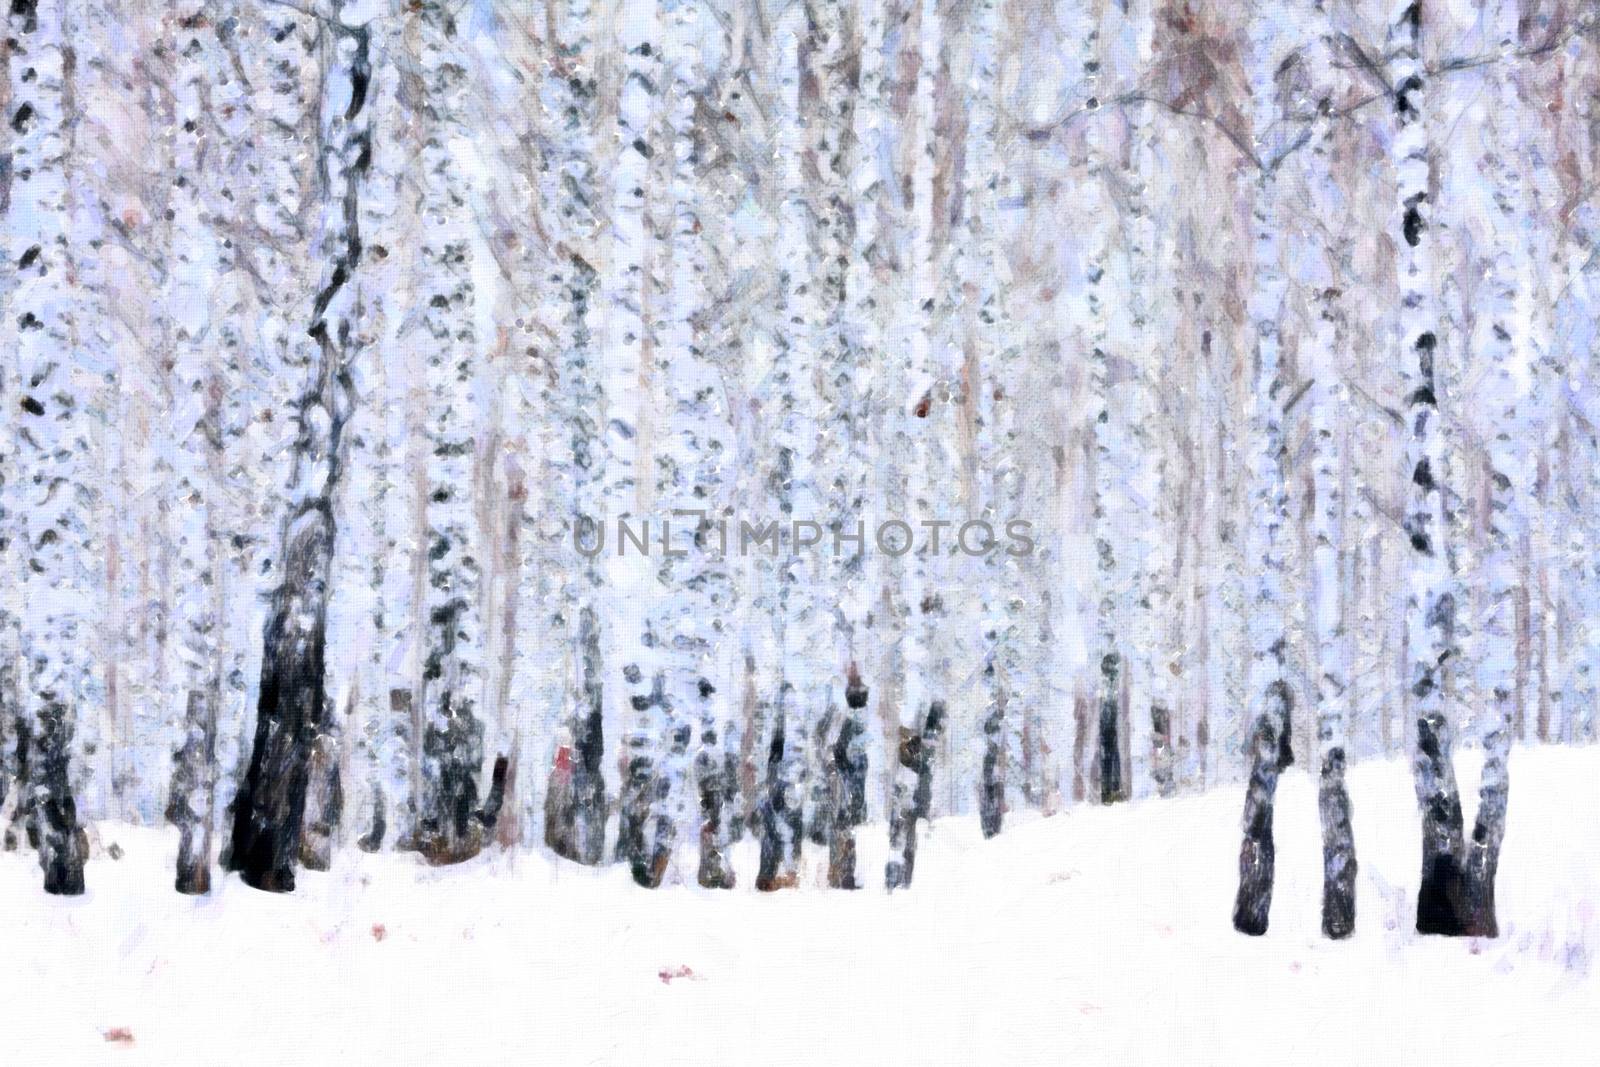 Birch forest in winter, oil paint stylization by Nobilior